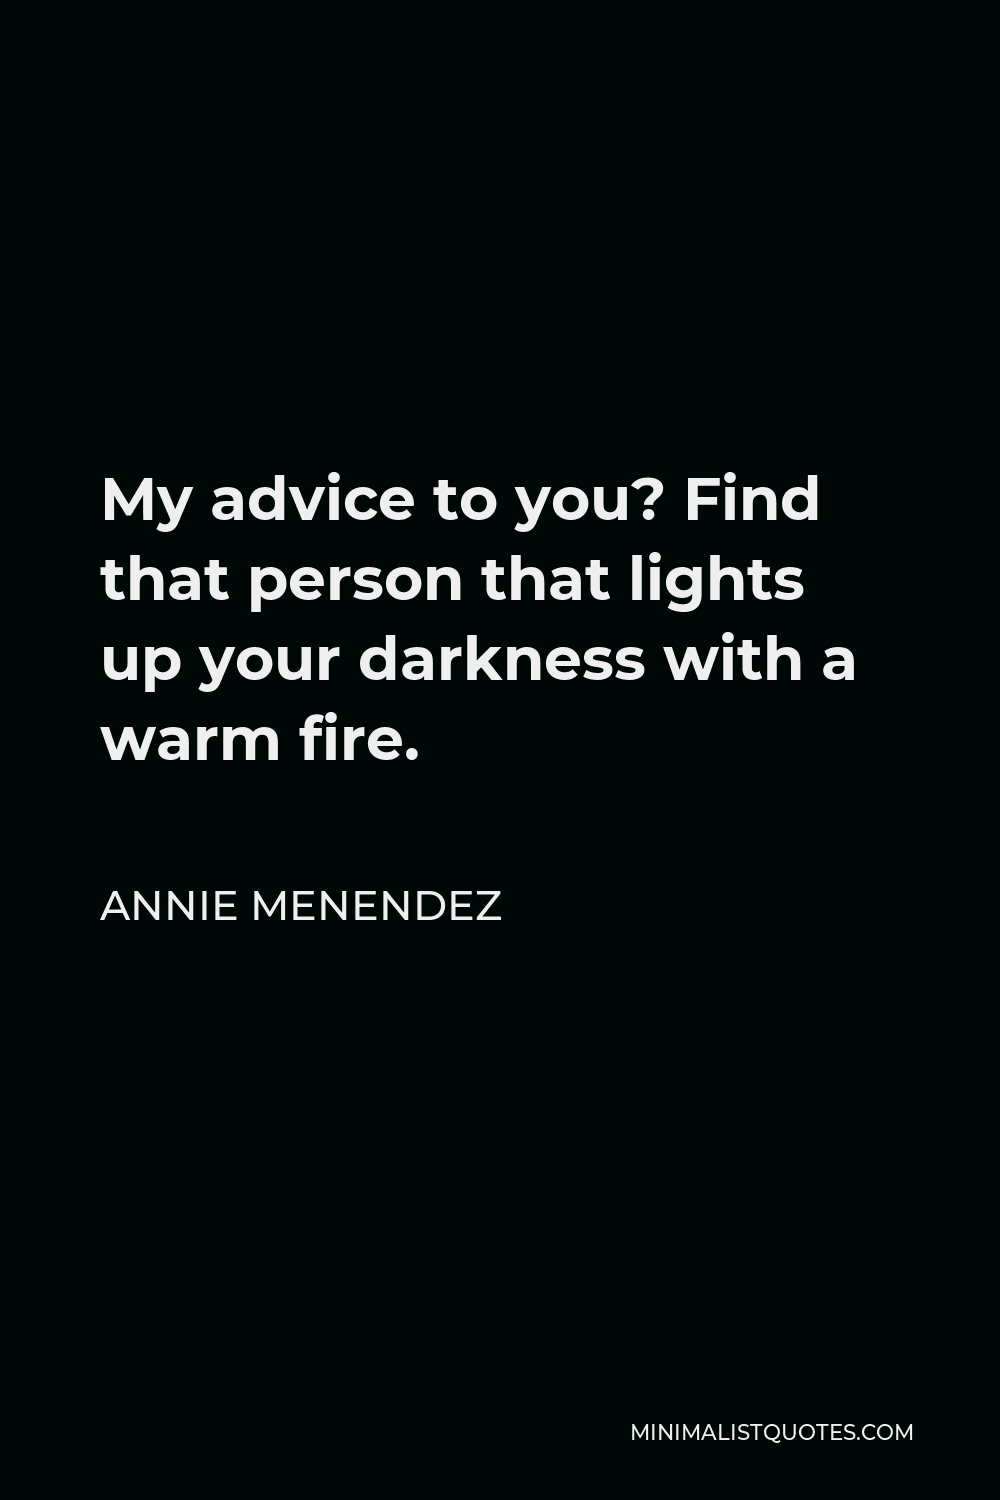 Annie Menendez Quote - My advice to you? Find that person that lights up your darkness with a warm fire.